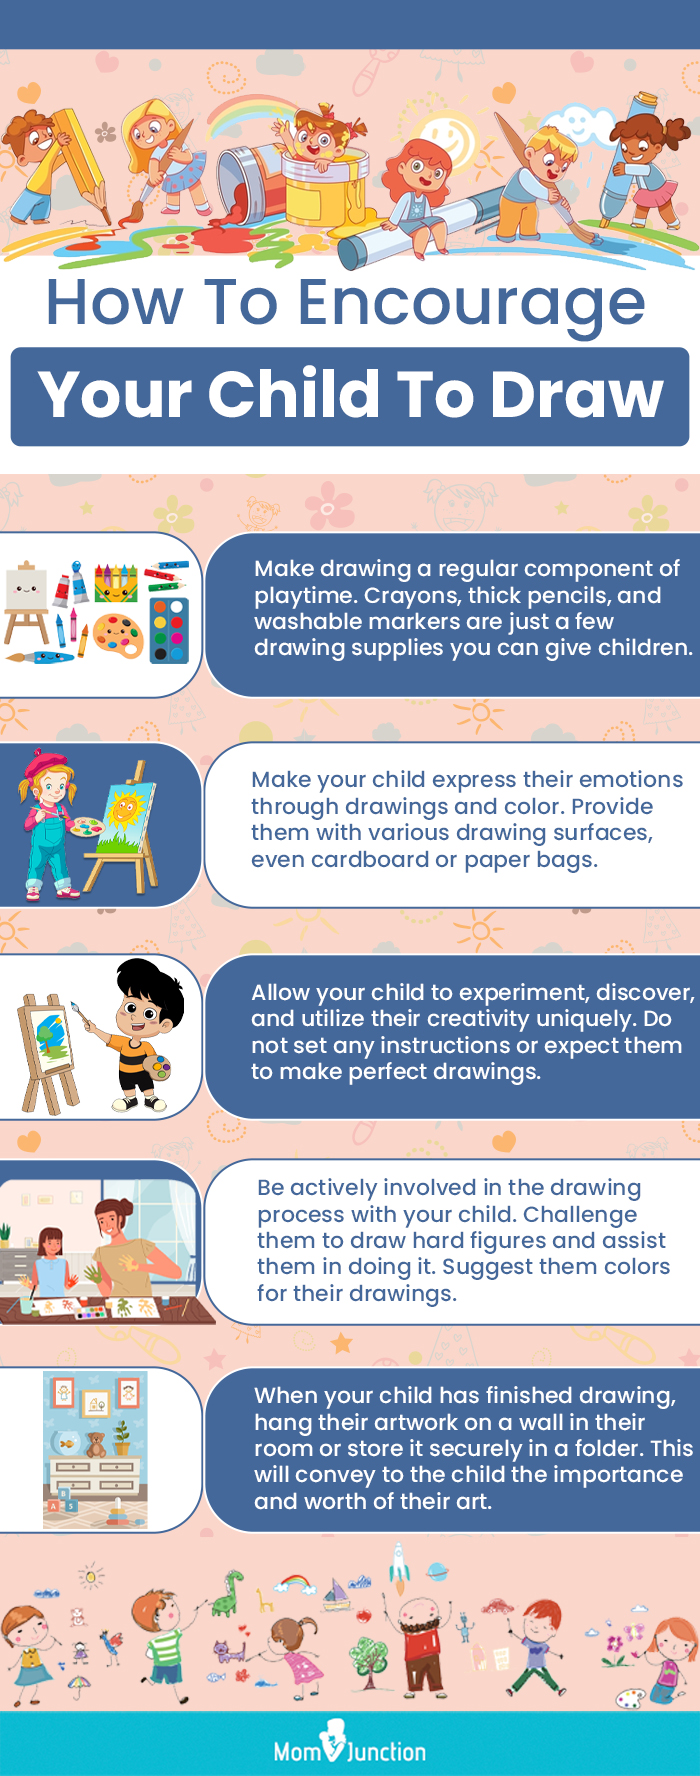 how to encourage your child to draw [infographic]